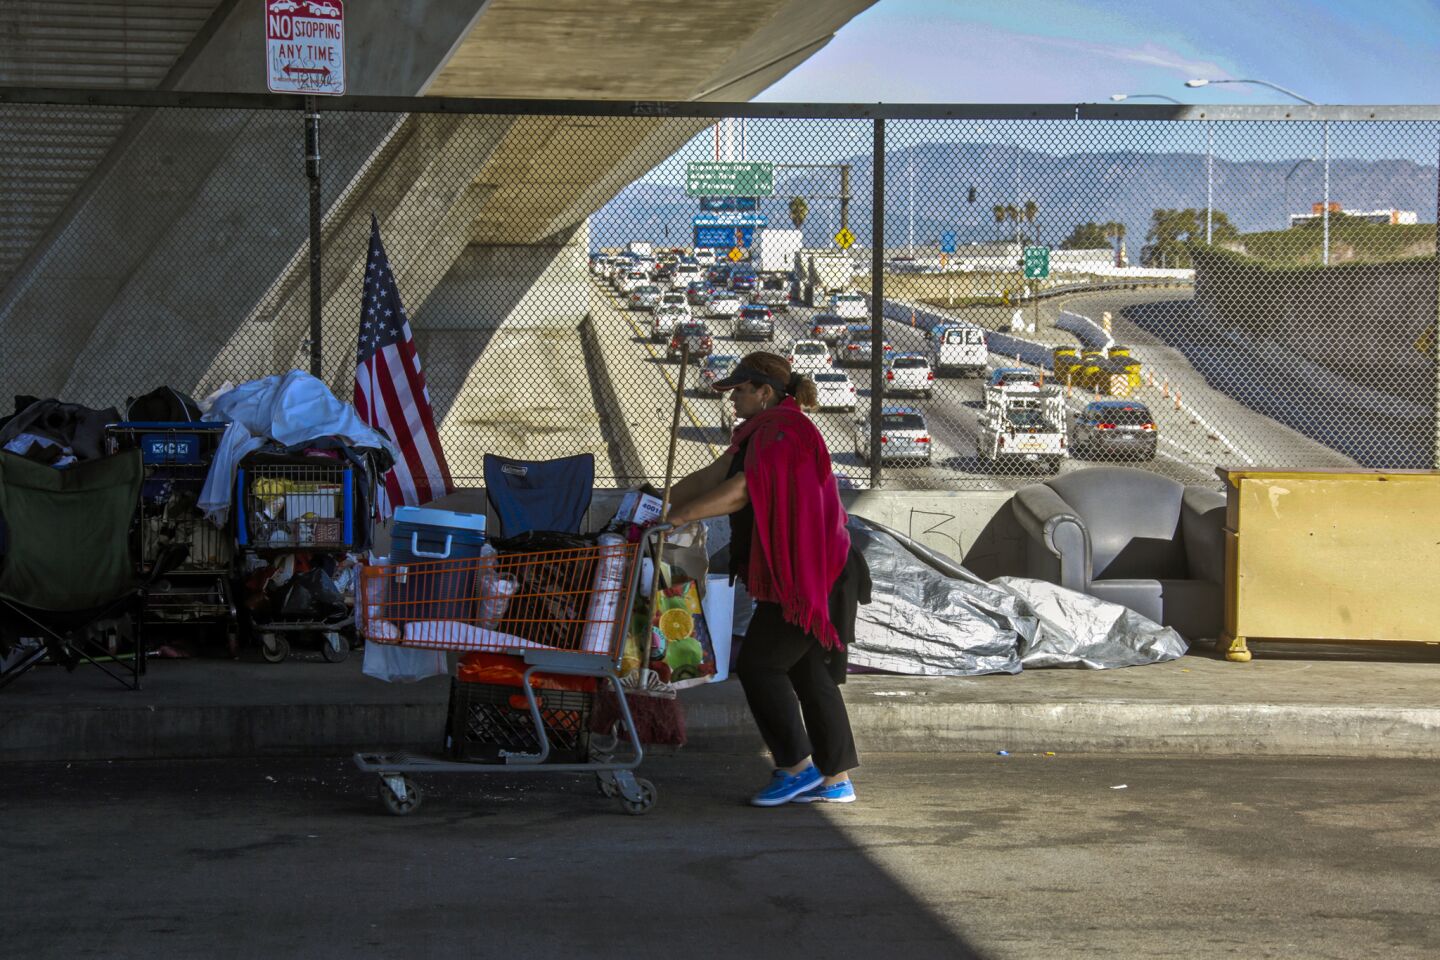 With an estimated 26,000 people calling Los Angeles sidewalks, cars and storm drains home, city officials on Tuesday approved an expanded campaign to help the homeless this winter by opening public buildings as temporary shelters and allowing people to sleep inside vehicles in designated lots.